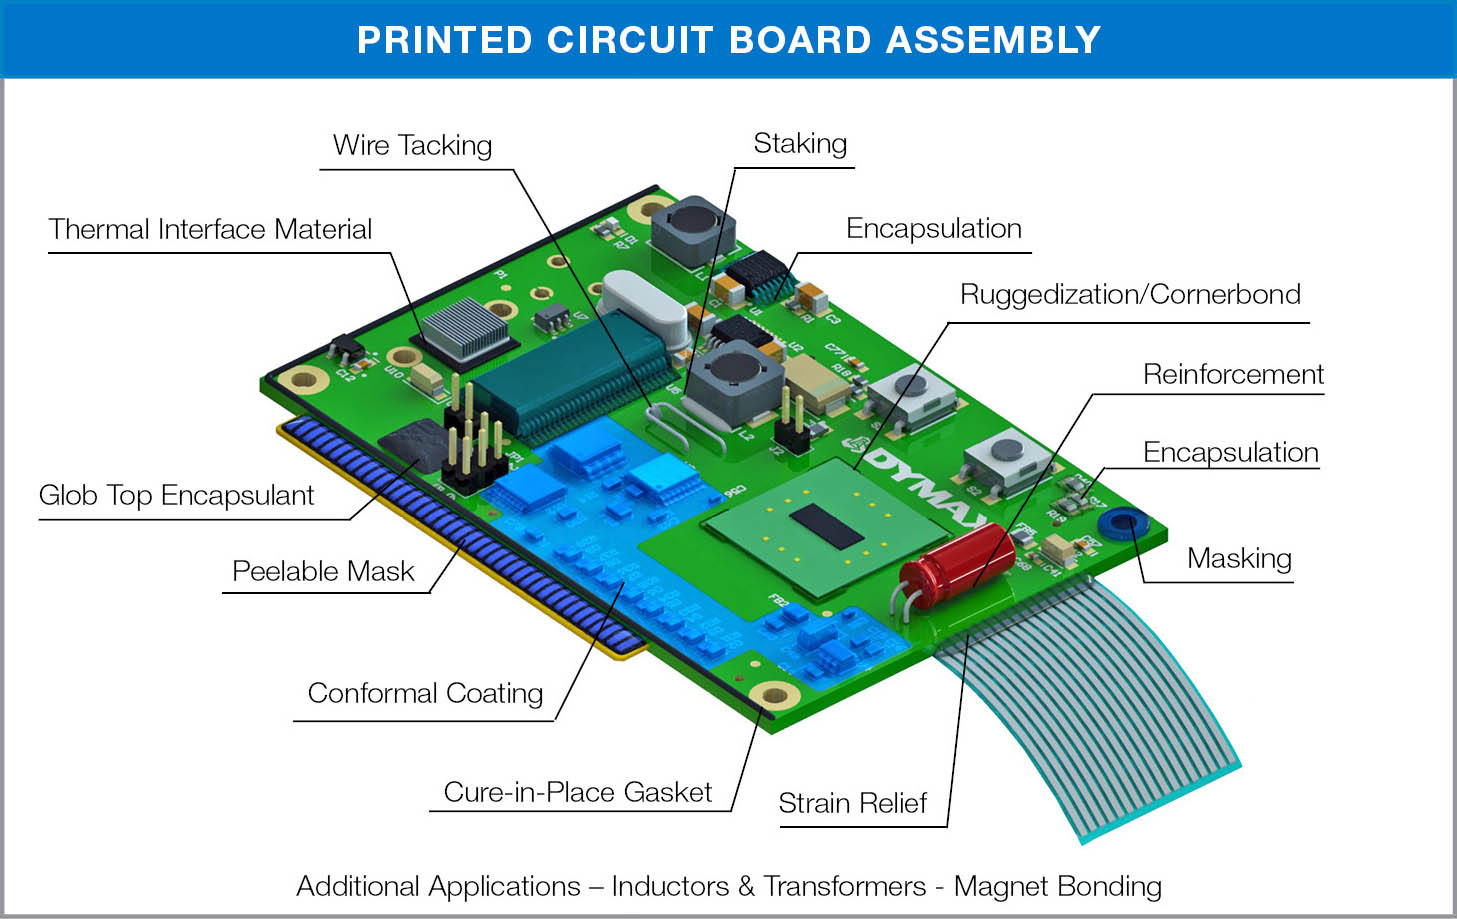 Printed circuit board diagram that illustrates the areas that Dymax light-curable electronics solutions are used.